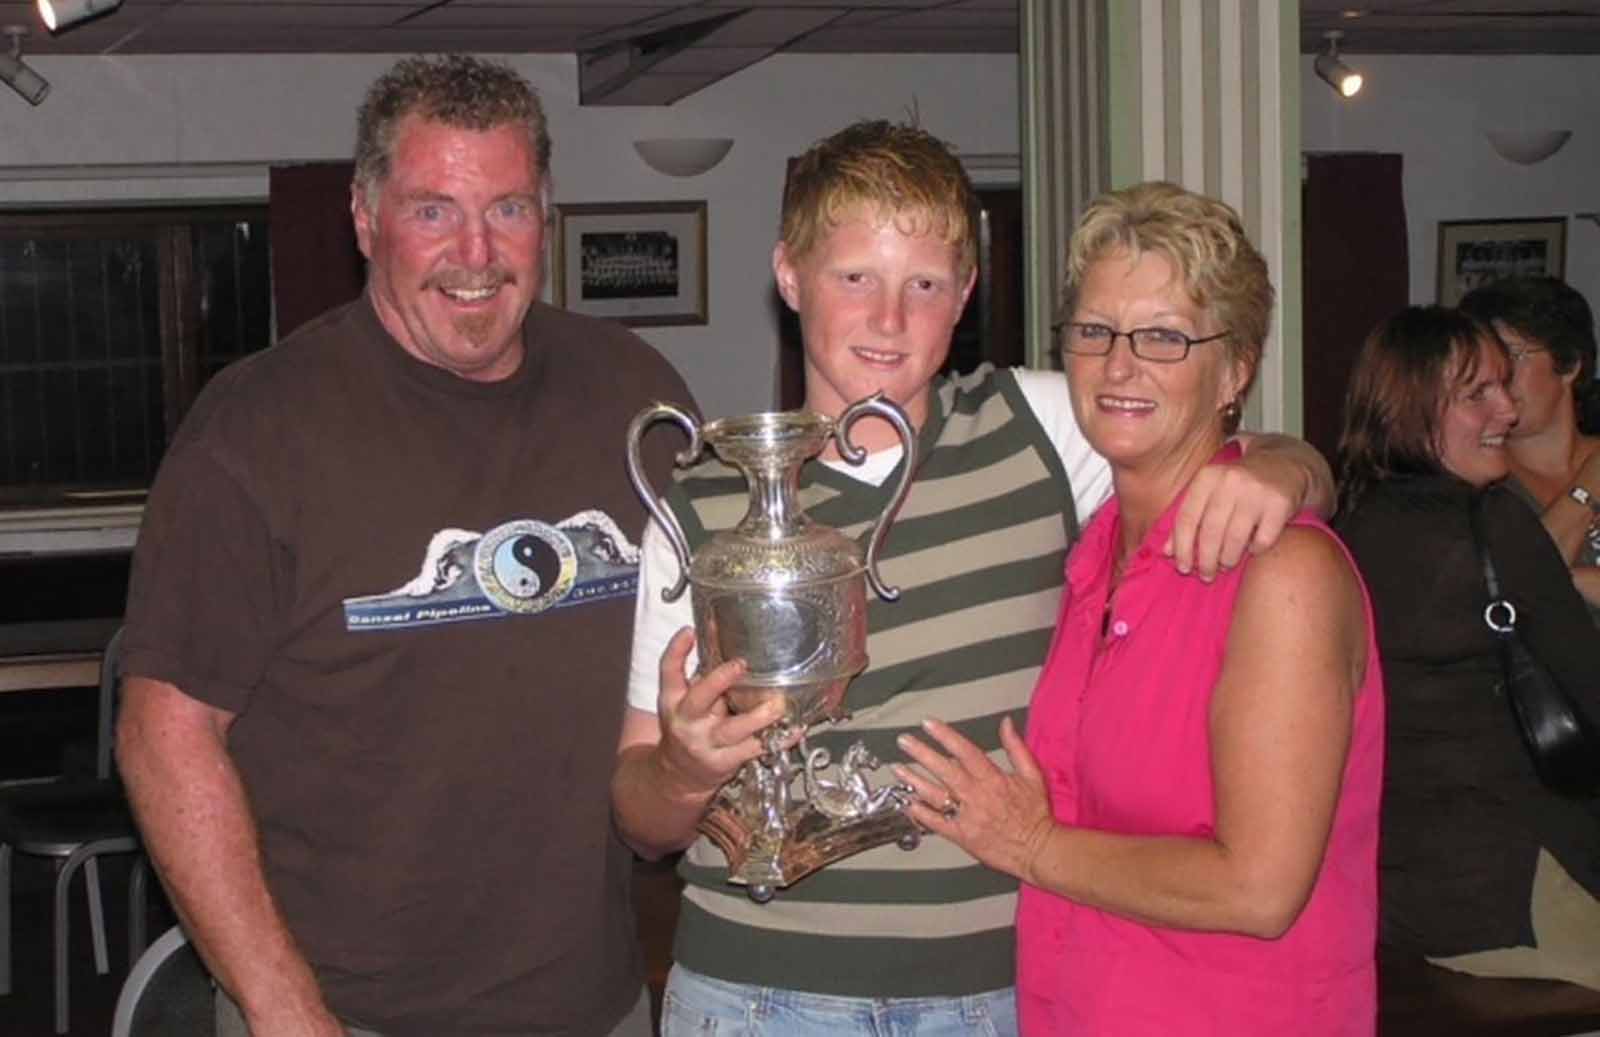 "Saying goodbye to my dad, mum and brother was tough," says Ben Stokes